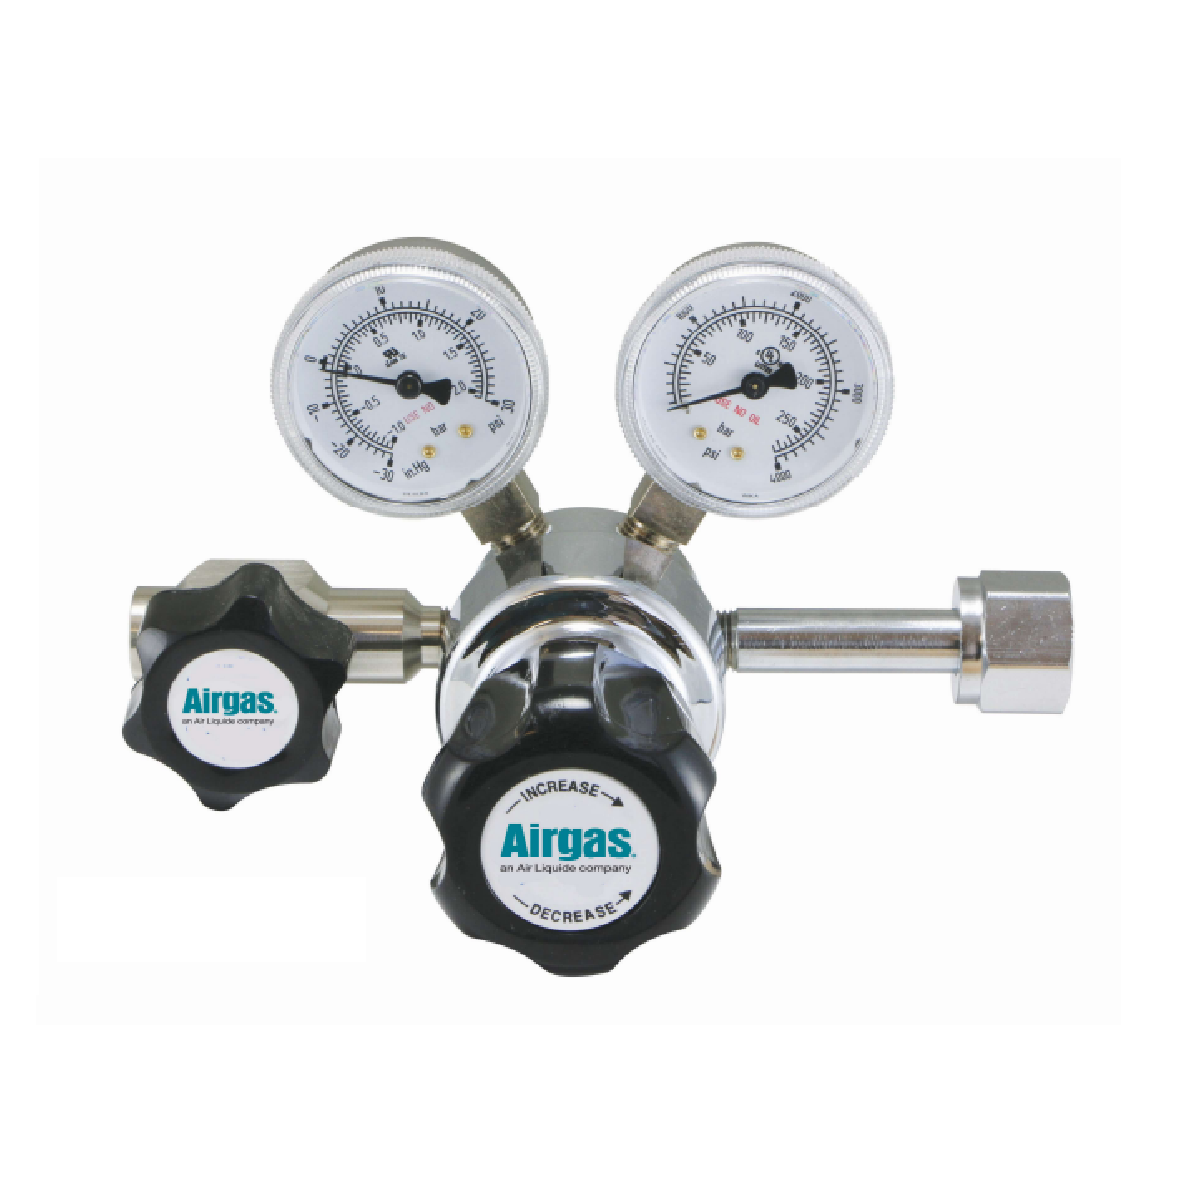 Airgas Model 205B580 Chrome-Plated Brass High Purity Single Stage Regulator With CGA-580 Connection